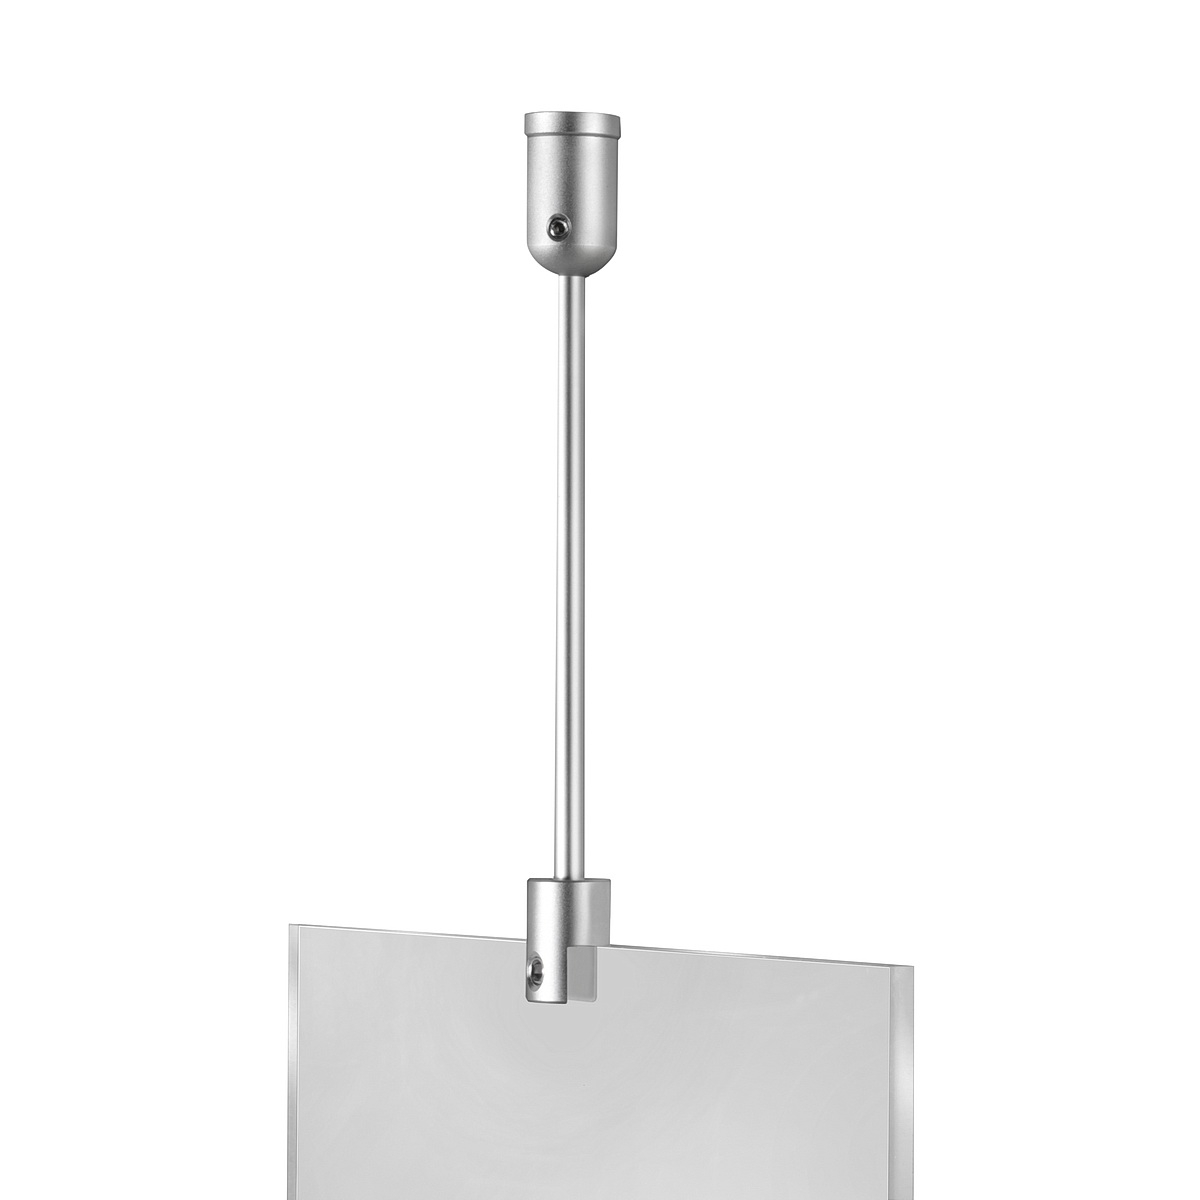 Ceiling Suspended 1/4'' Diameter Rod Kit - 9' (3 x 3' (108'') Length) - Clear Anodized Aluminum Finish